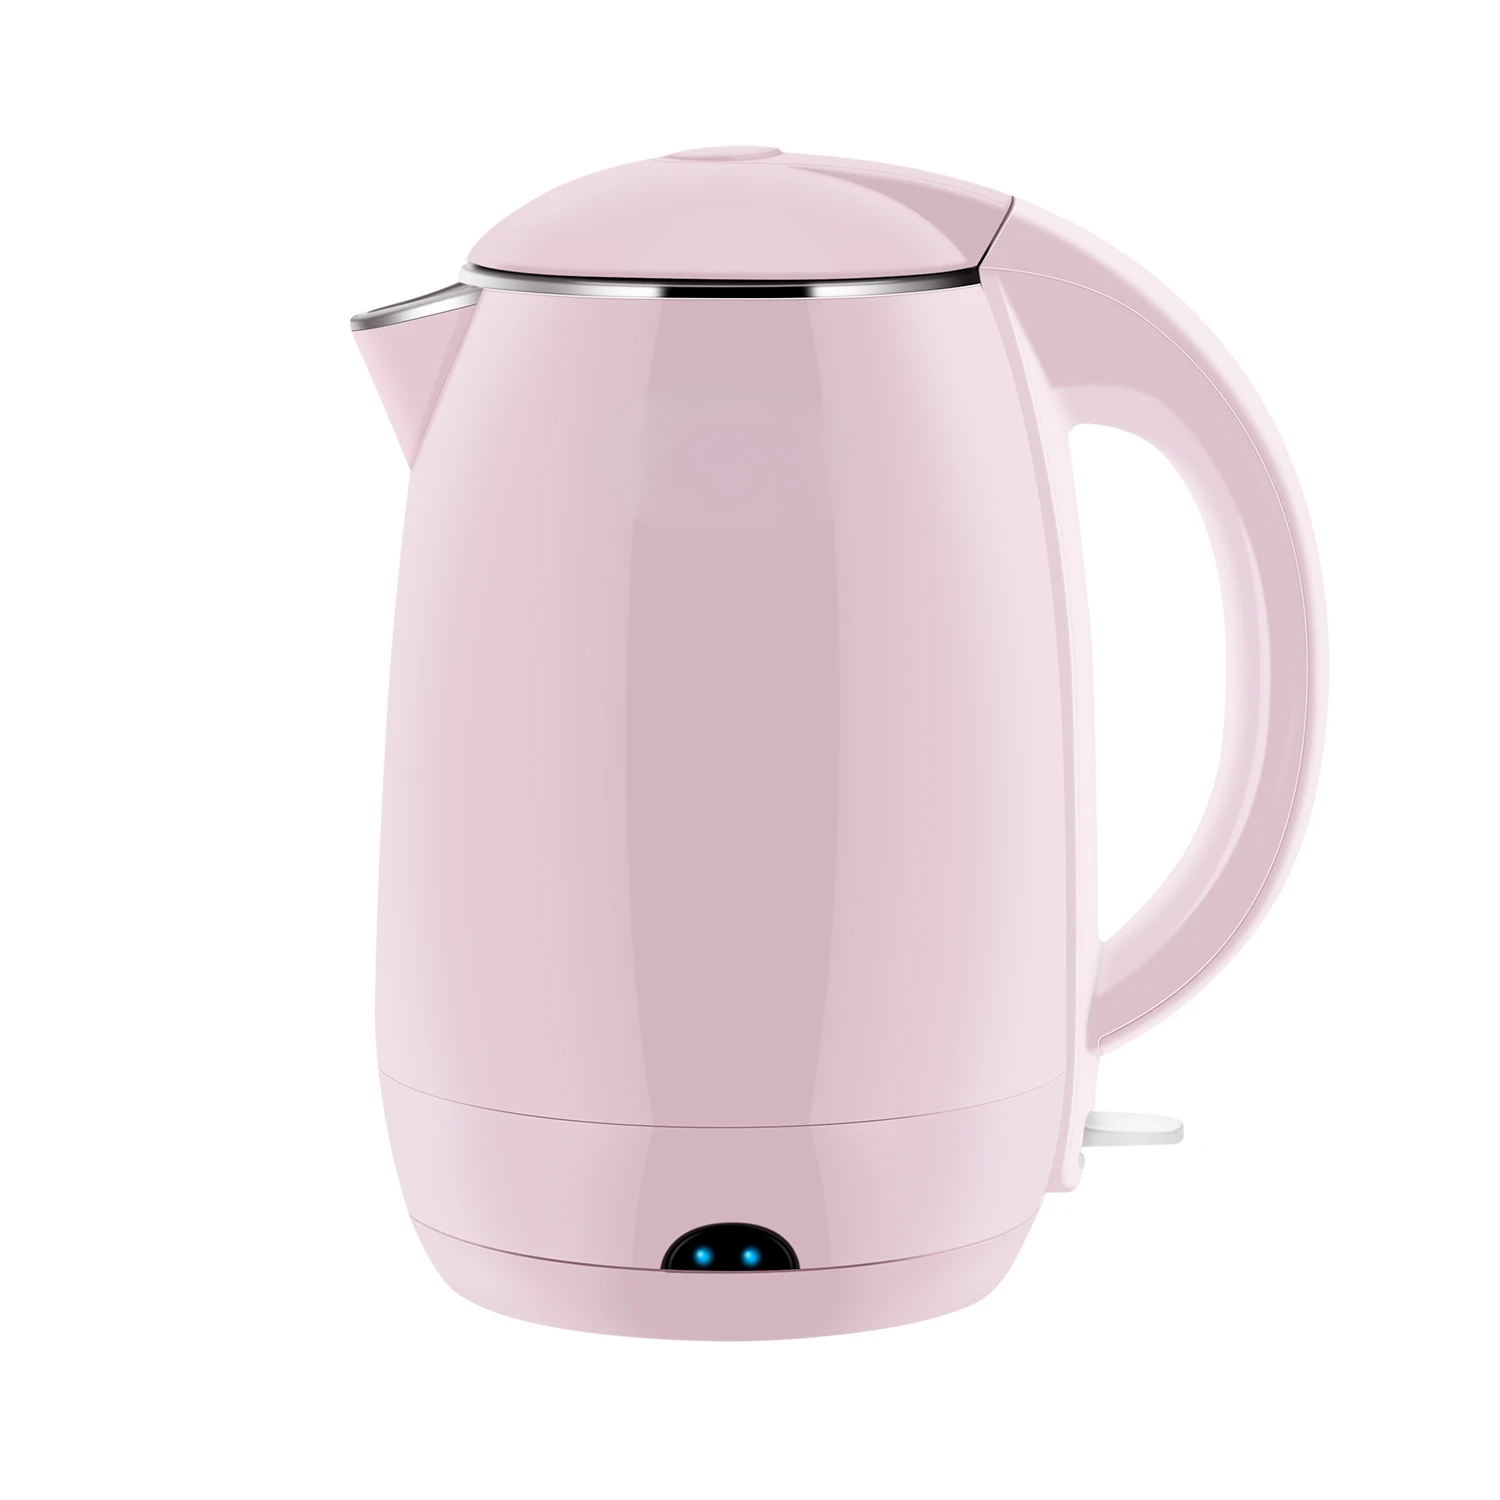 Electric Cordless Kettle - Crafted with 1.8L Capacity, Double Wall Housing, Stainless, Steel Interior, Concealed Heating Element